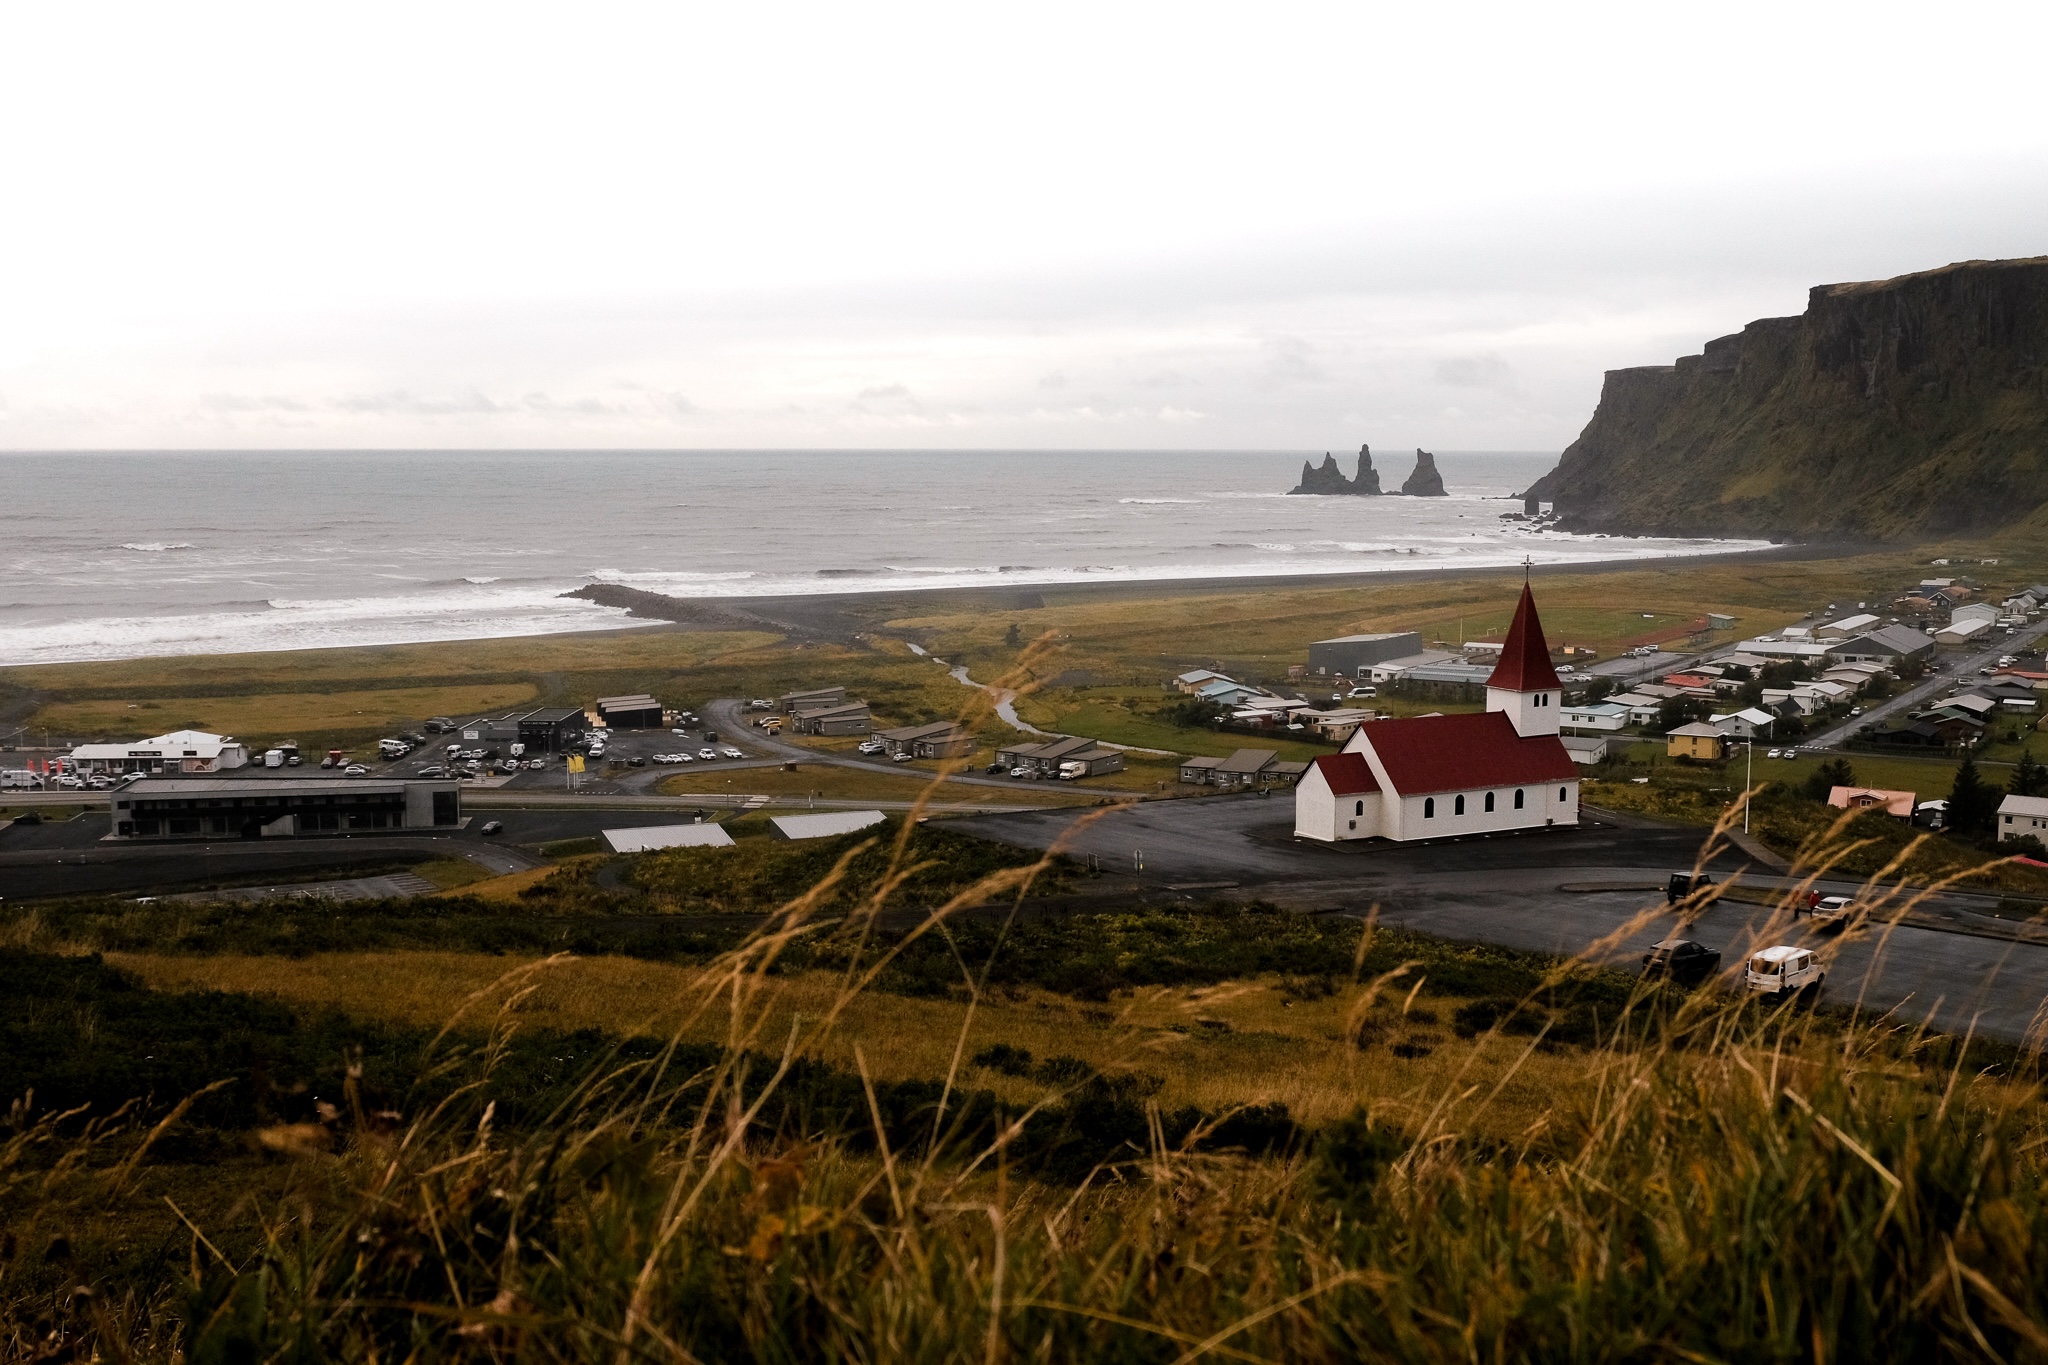 Vik from the mountain side showing off it's beautiful white church with a red roof, the black beach in the distance